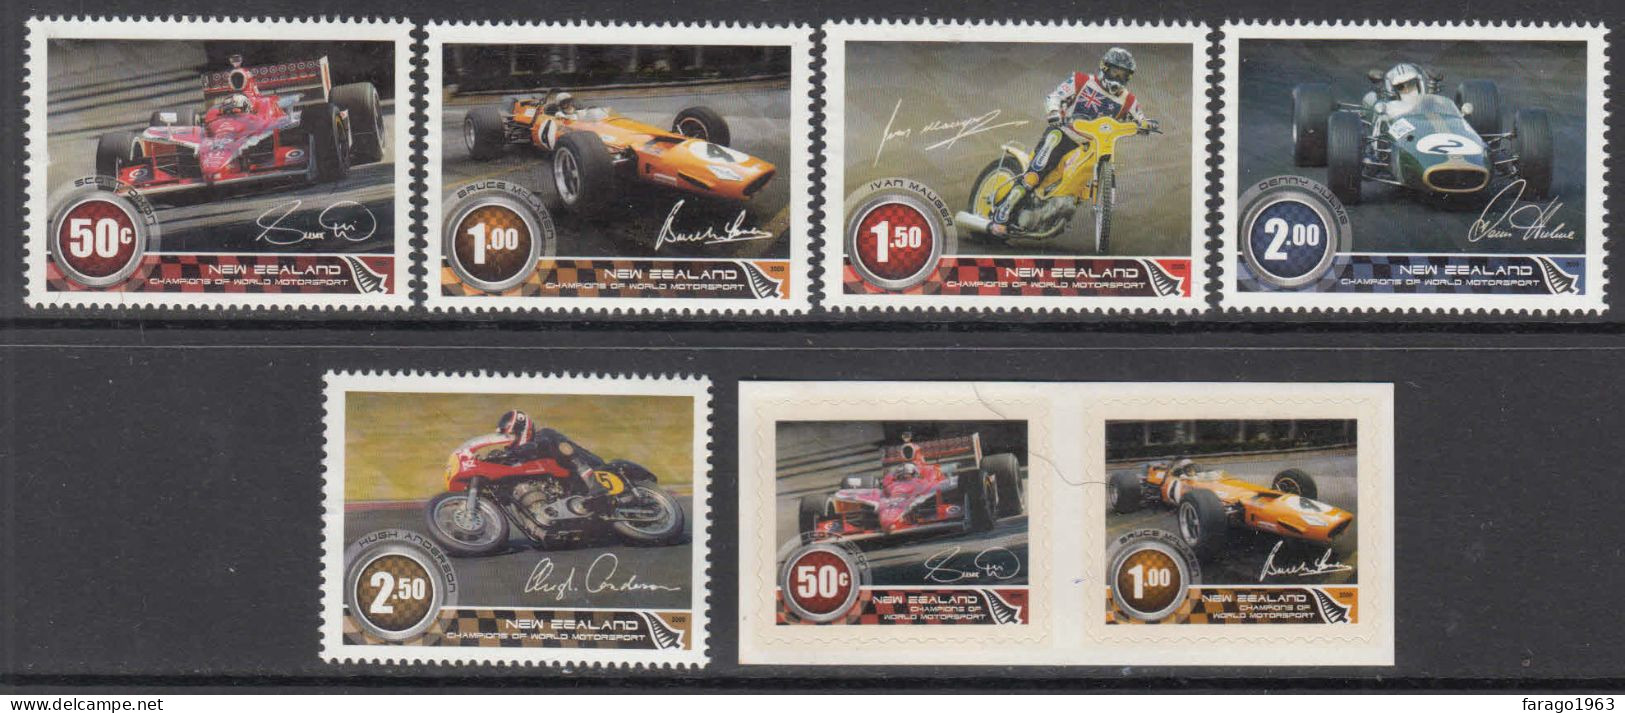 2009 New Zealand Motor Champions Car Racing Motorcycles Complete Set Of 7 MNH @ BELOW FACE VALUE - Nuevos